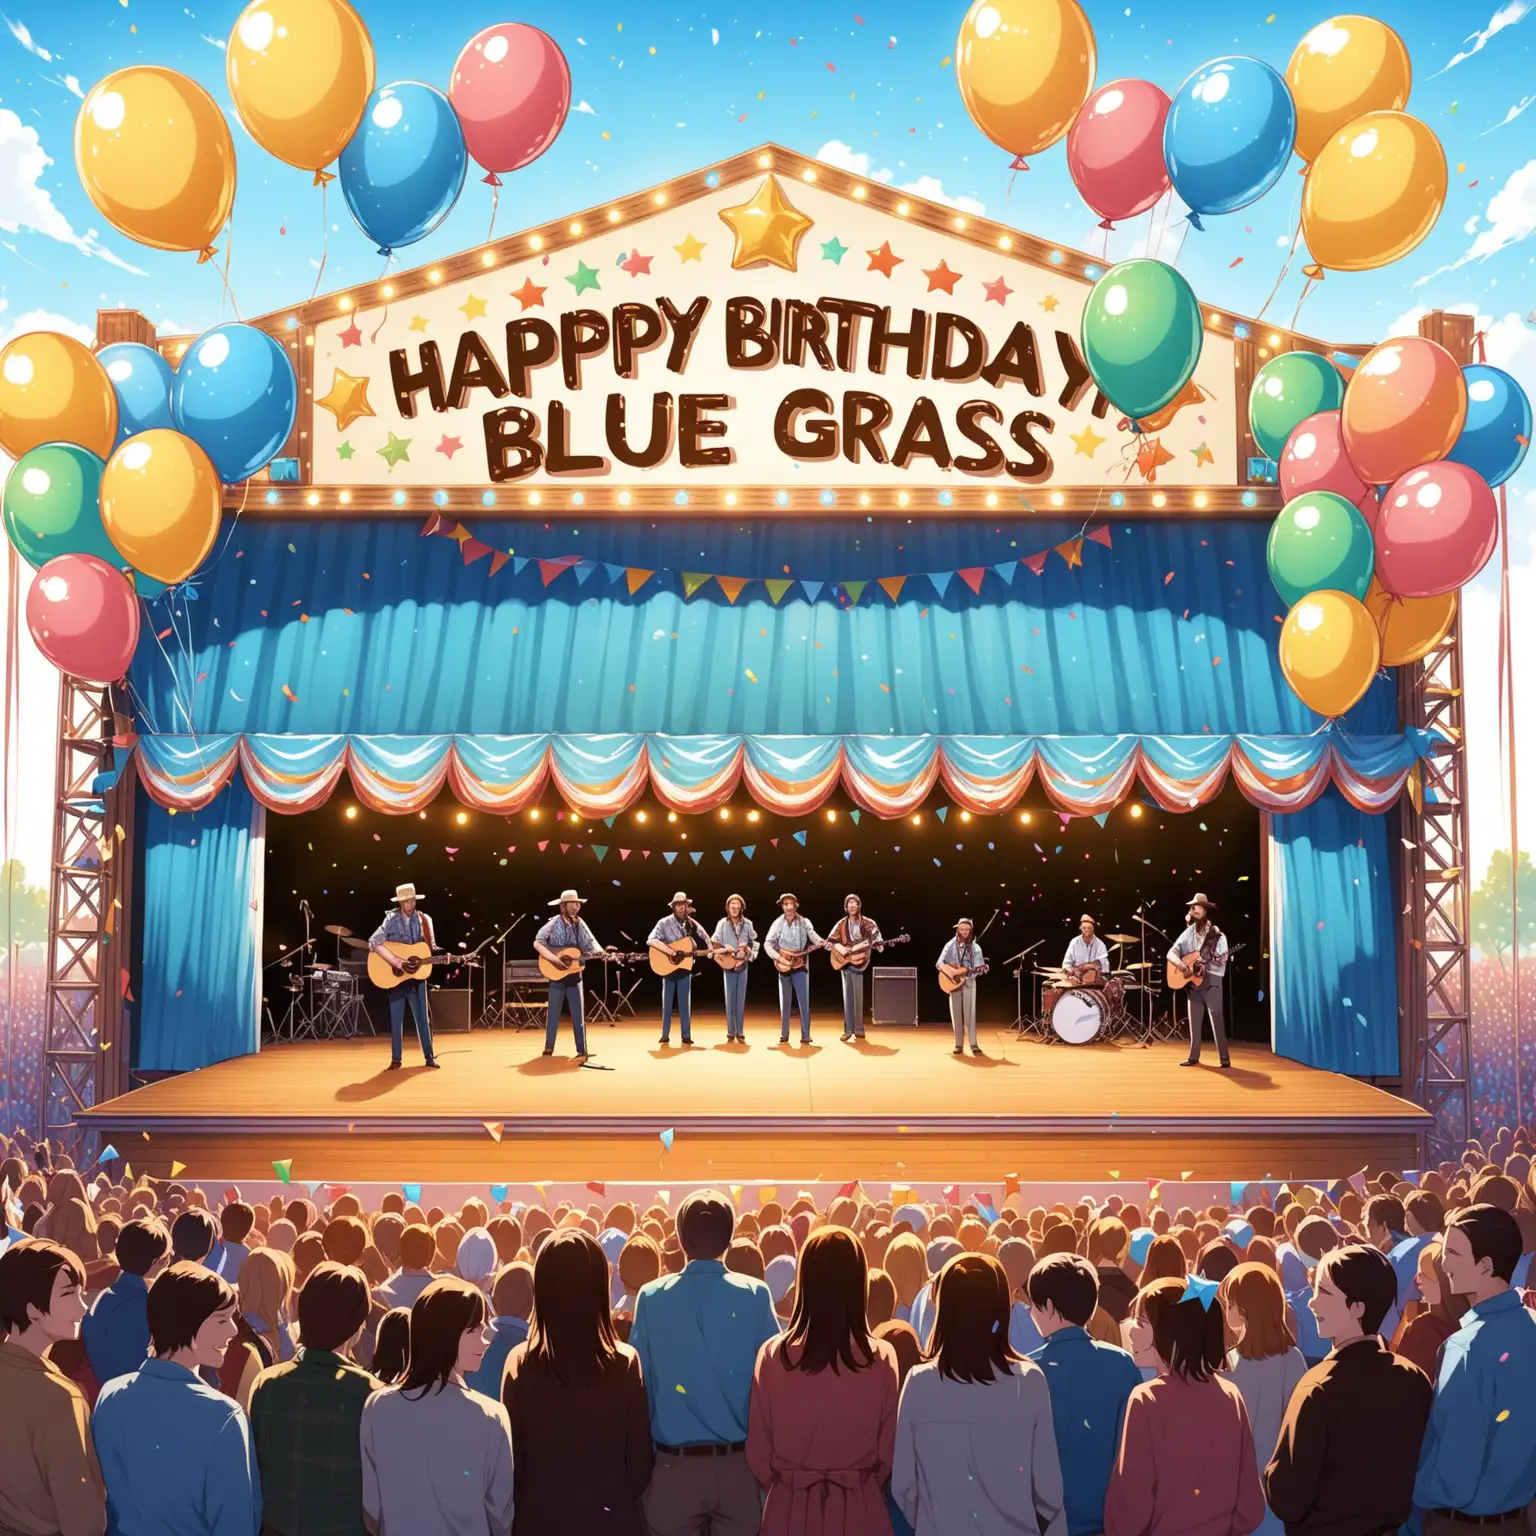 Happy Birthday blue grass band standing on a stage outside with people in front of the stage. There are birthday balloons on both sides of the stage and a banner hanging on the back of the stage

